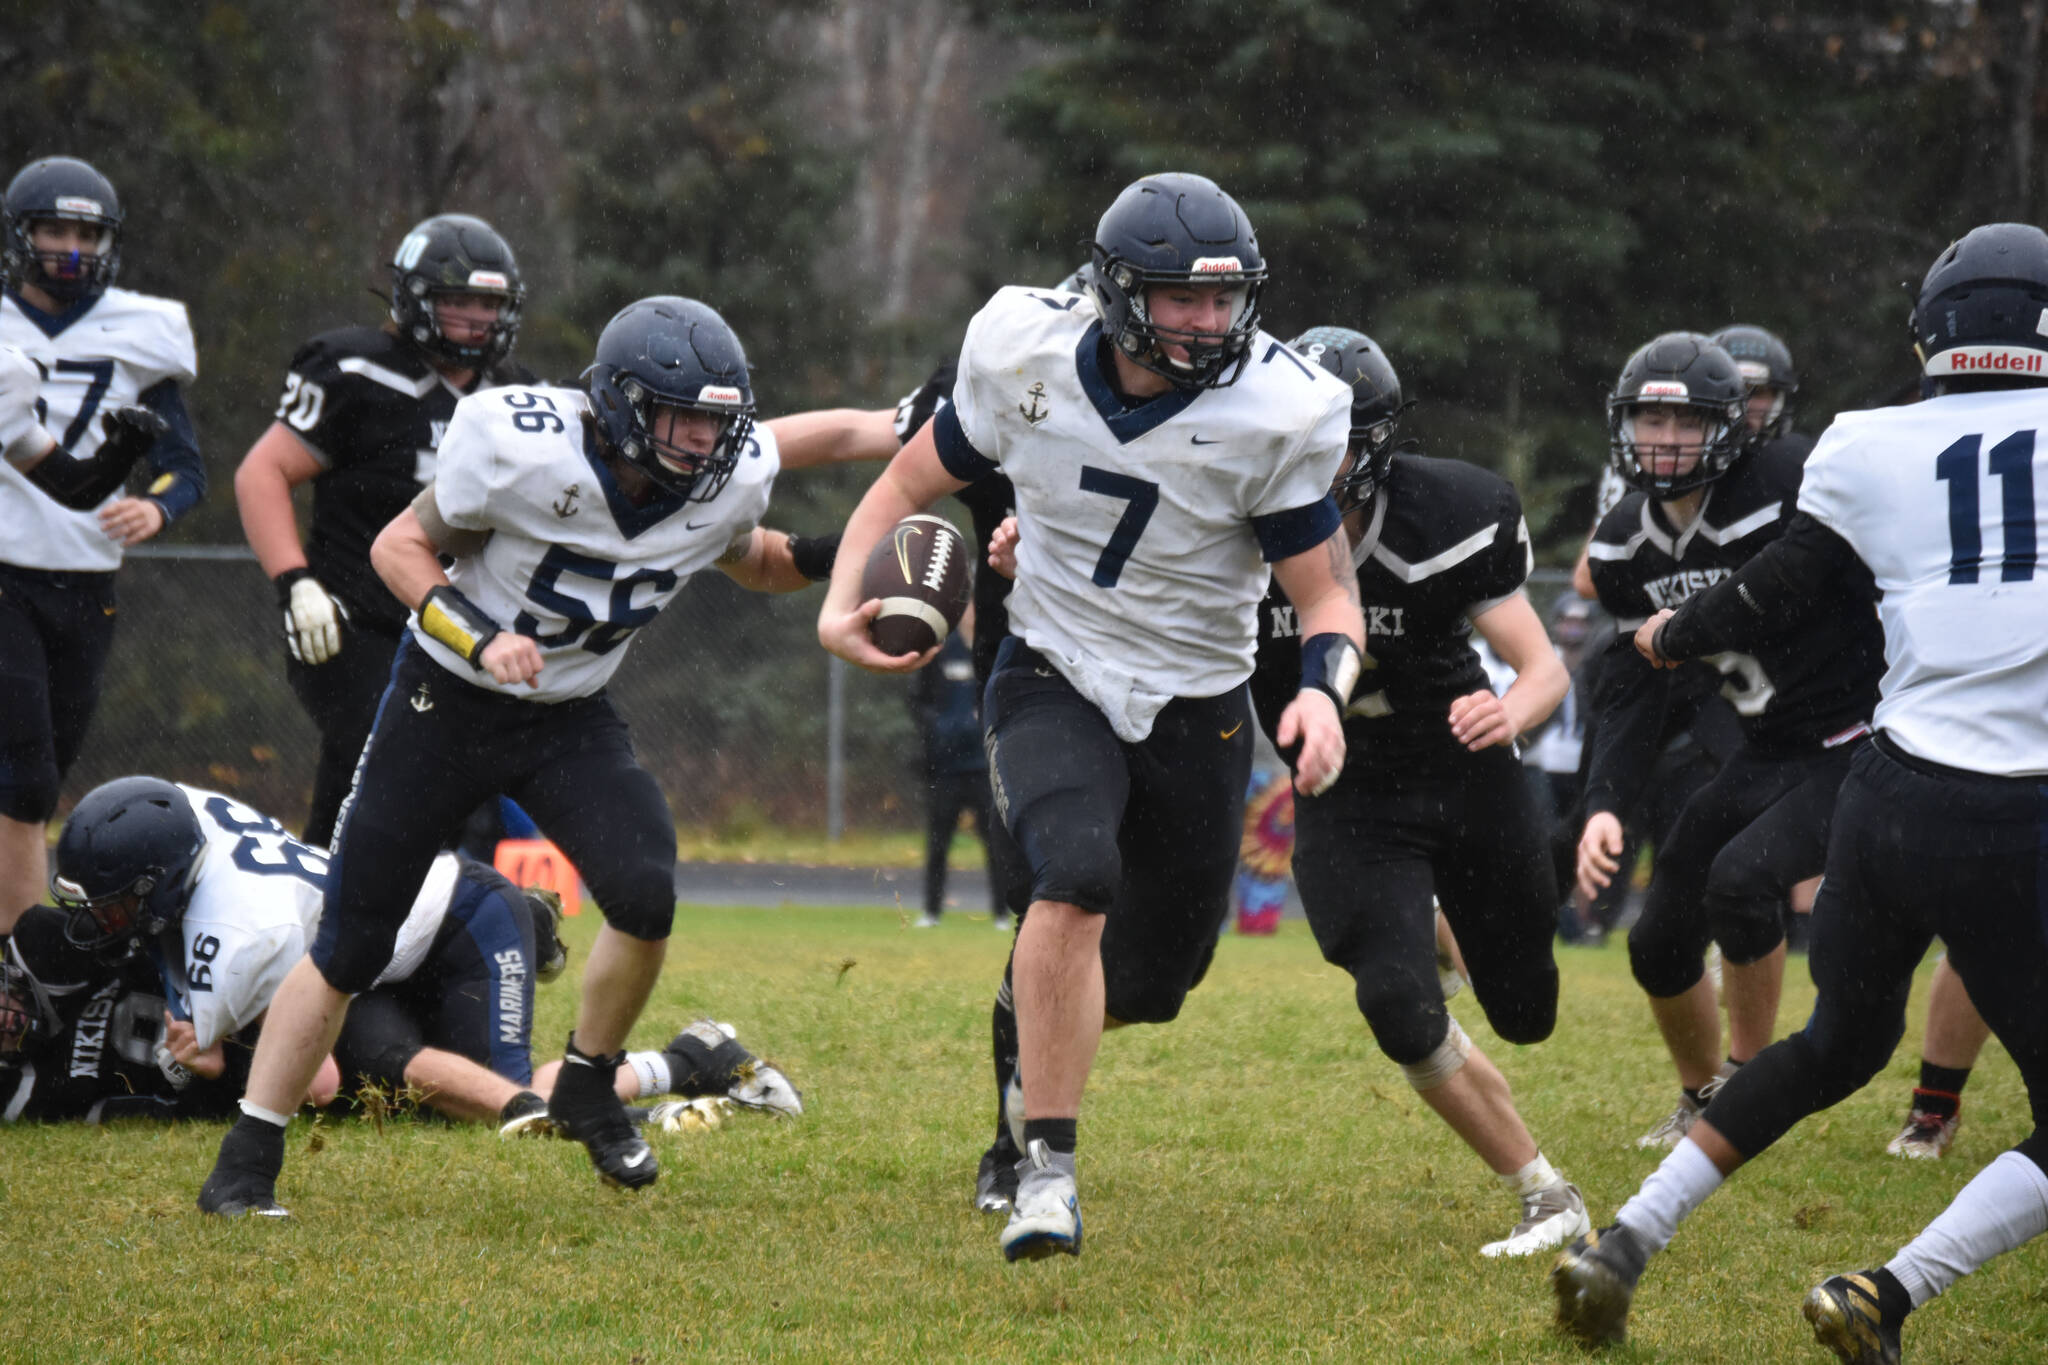 Homer's Carter Tennison runs with the ball, pursued by several Bulldogs, during the playoff game on Saturday, Oct. 8, 2022, at Nikiski Middle/High School in Nikiski, Alaska. (Jake Dye/Peninsula Clarion)